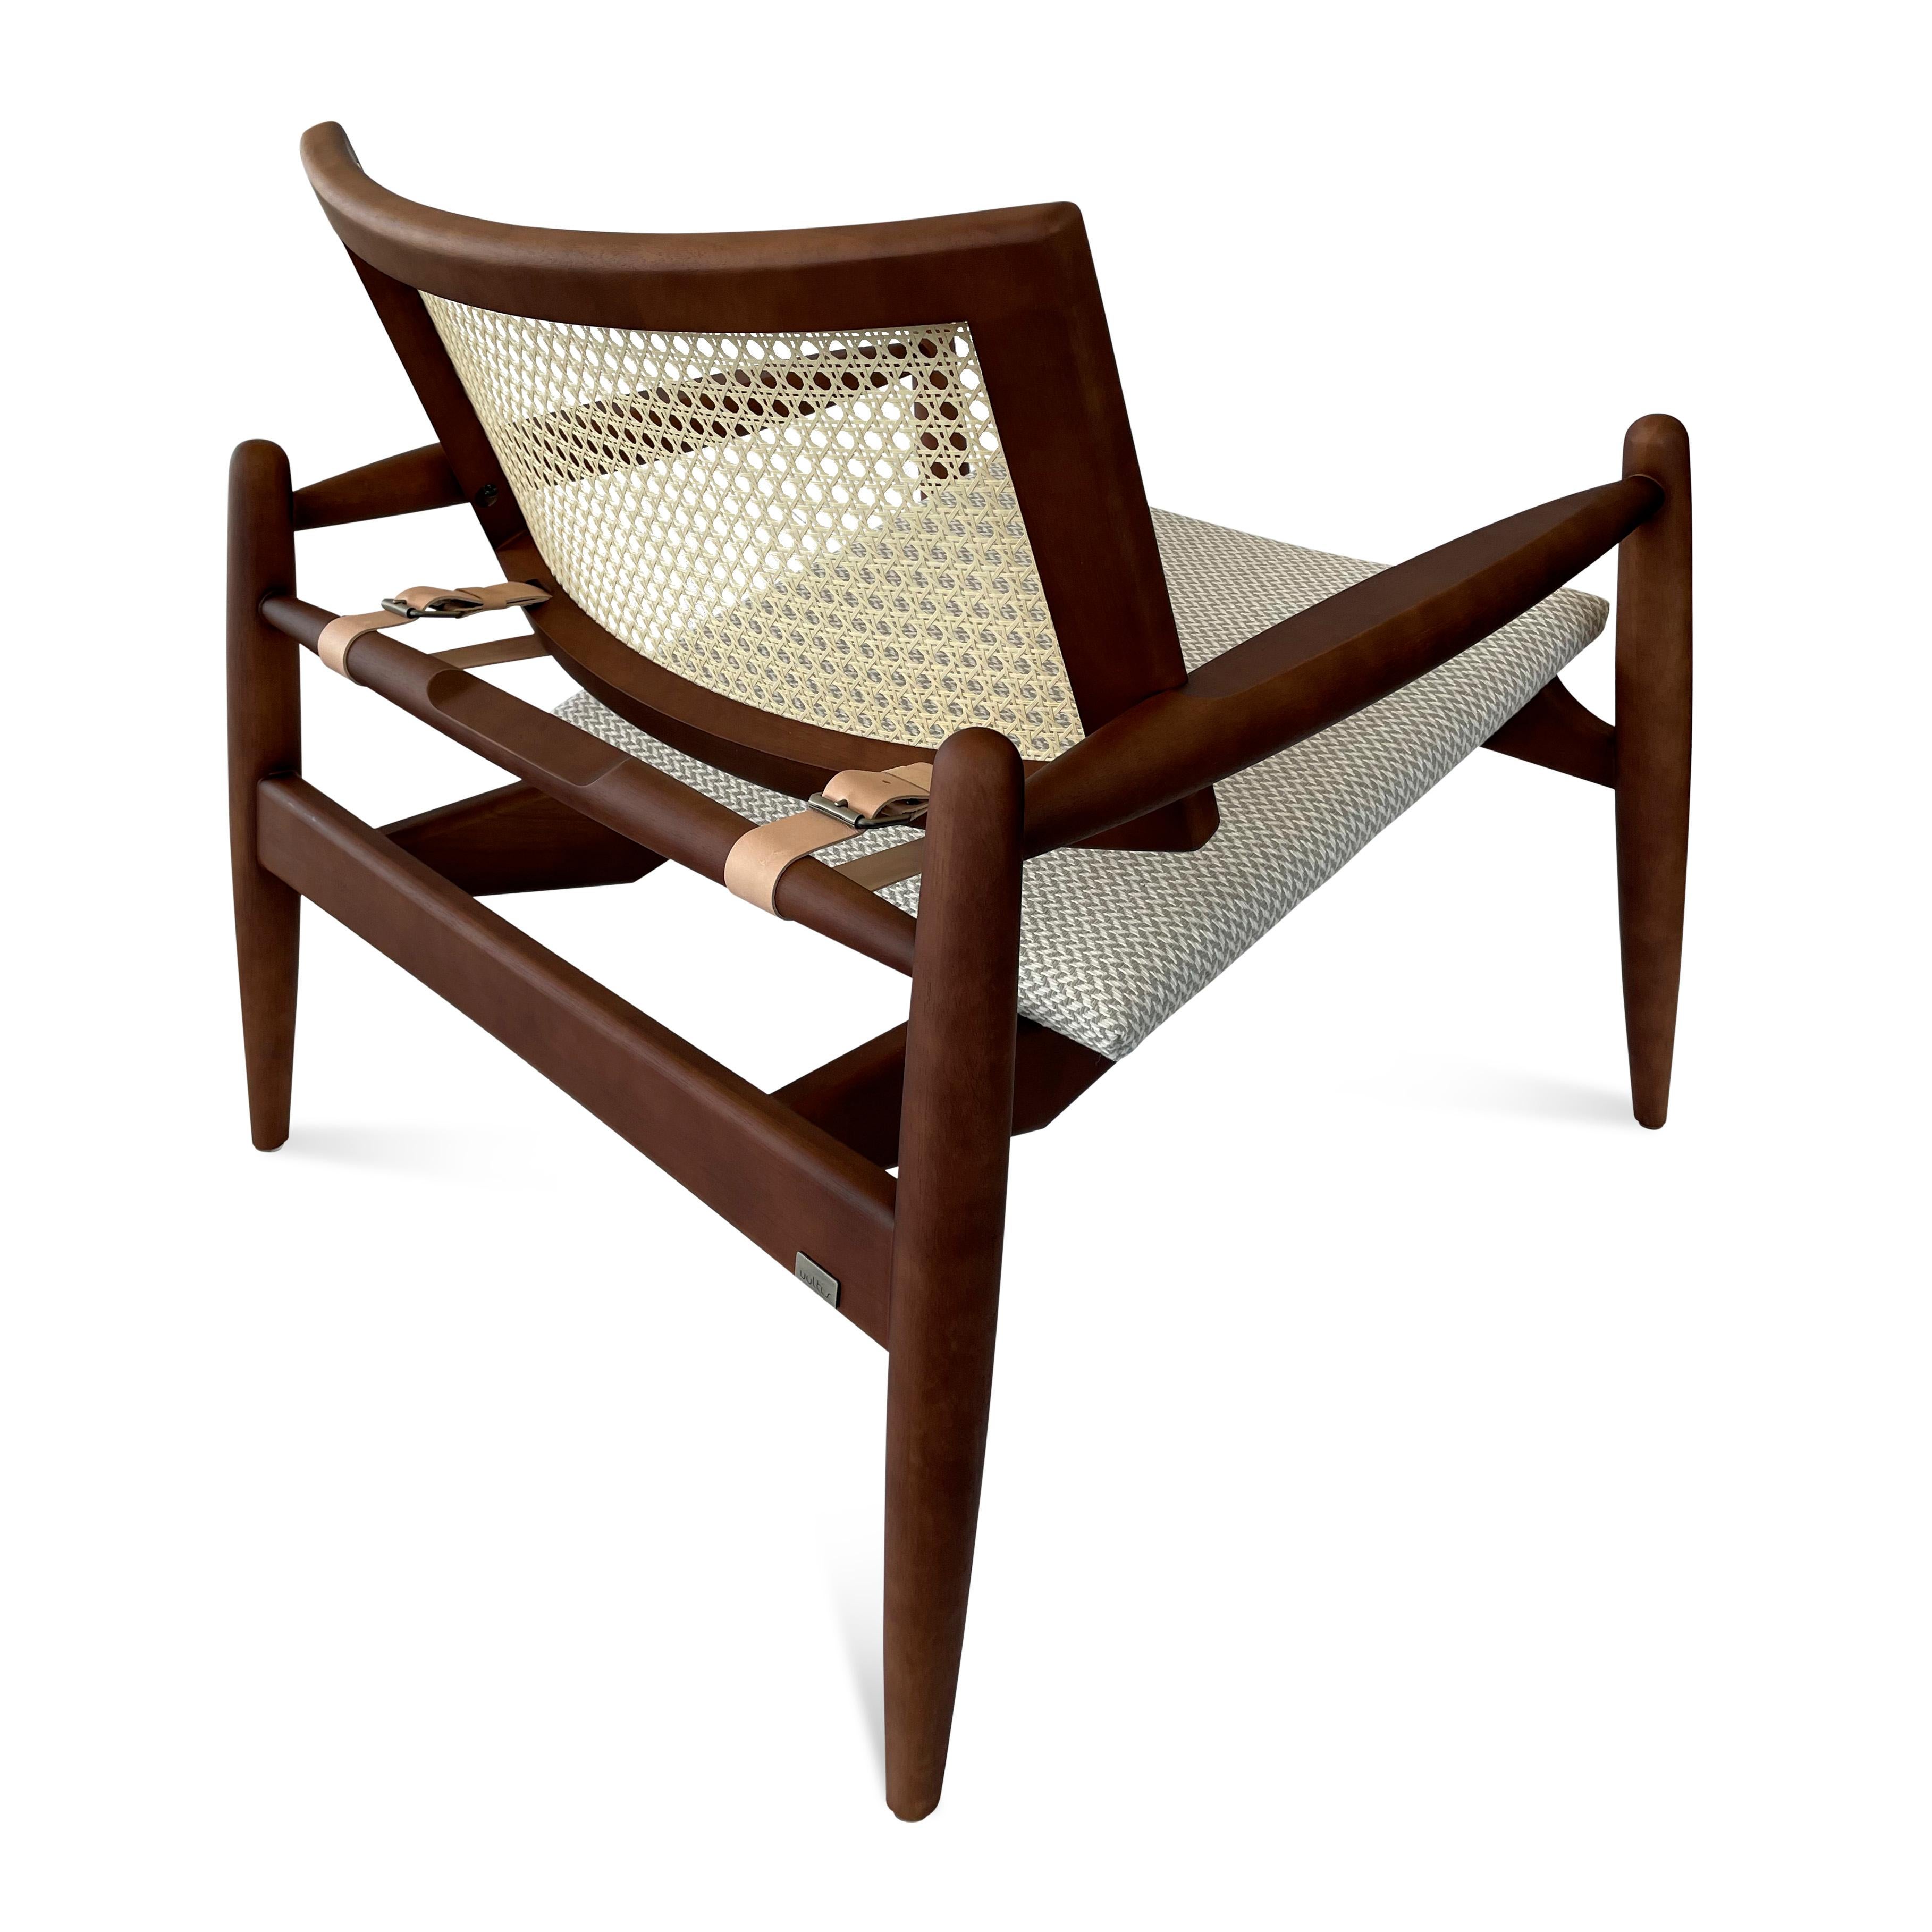 Contemporary Soho Curved Cane-Back Chair in Walnut Wood with Herringbone Fabric Chair Seat For Sale